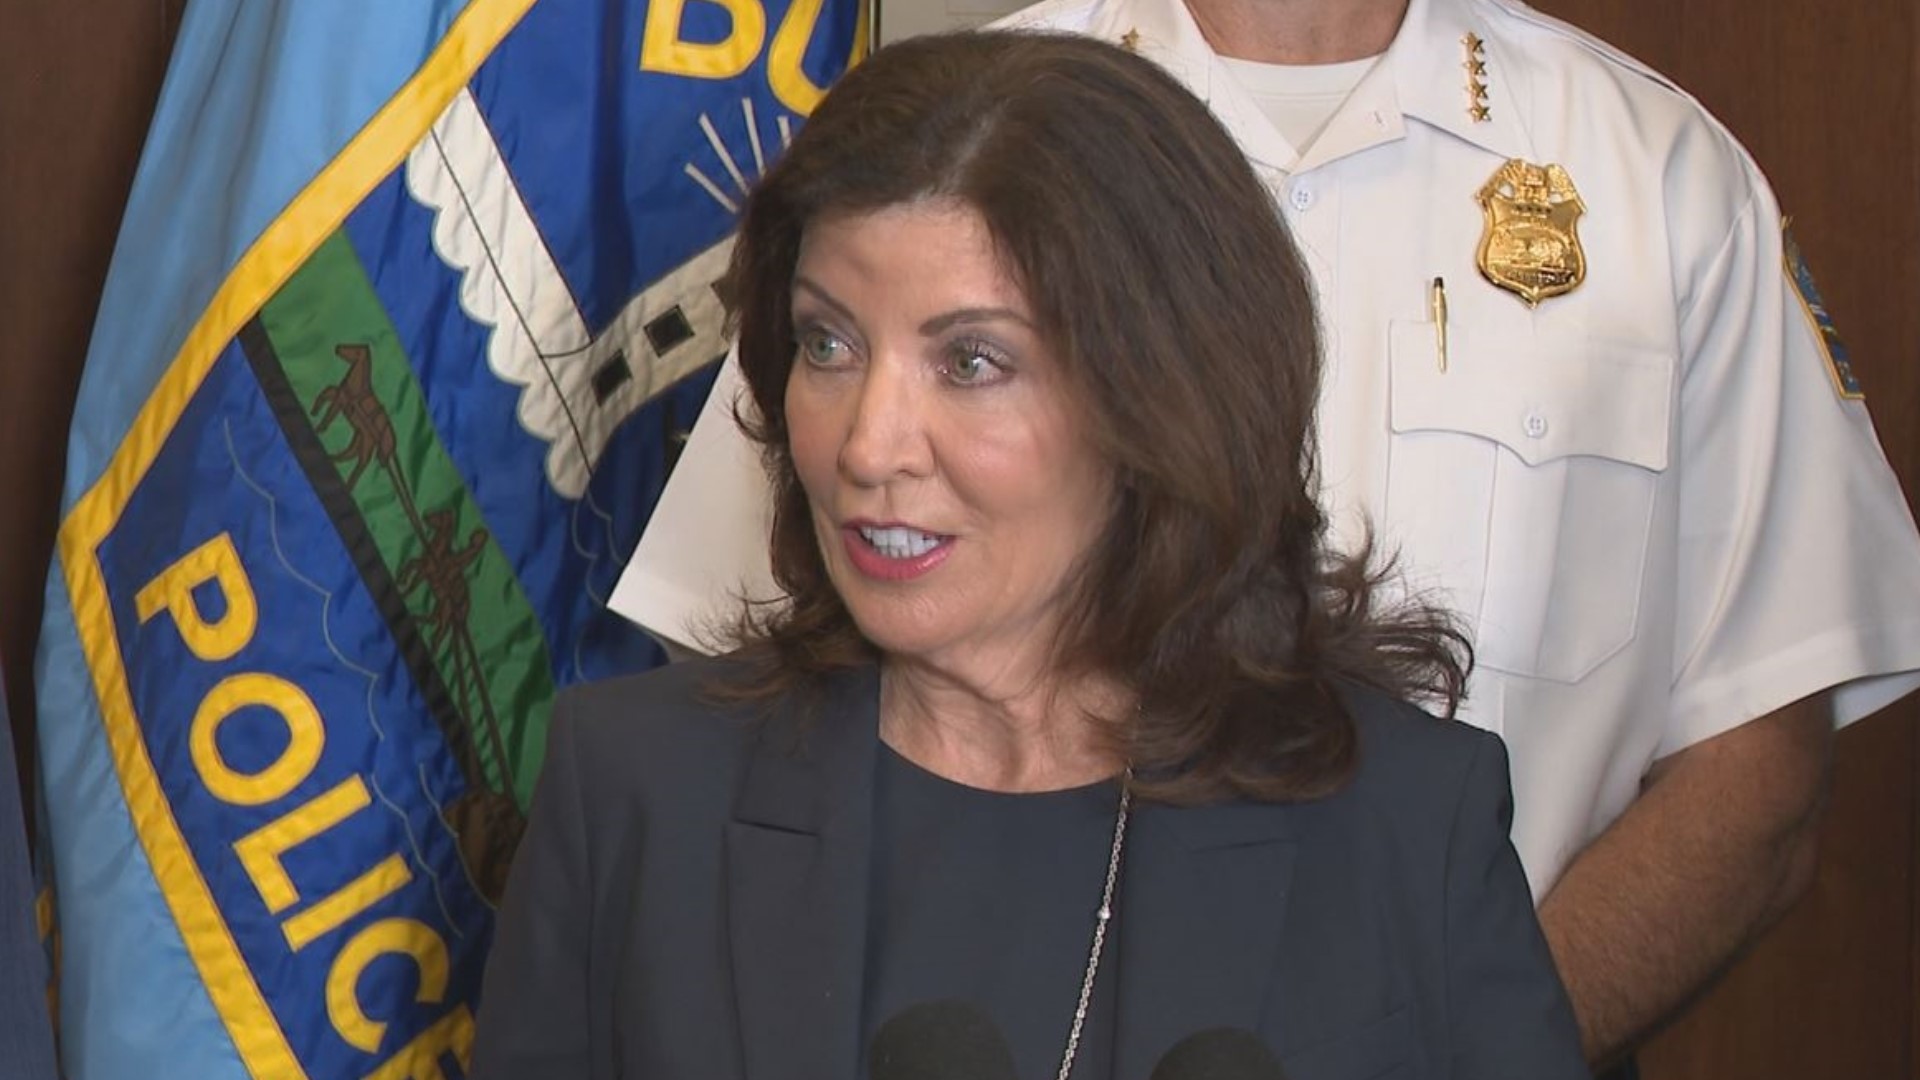 New York Governor Kathy Hochul unveiled highlights from the state of the state